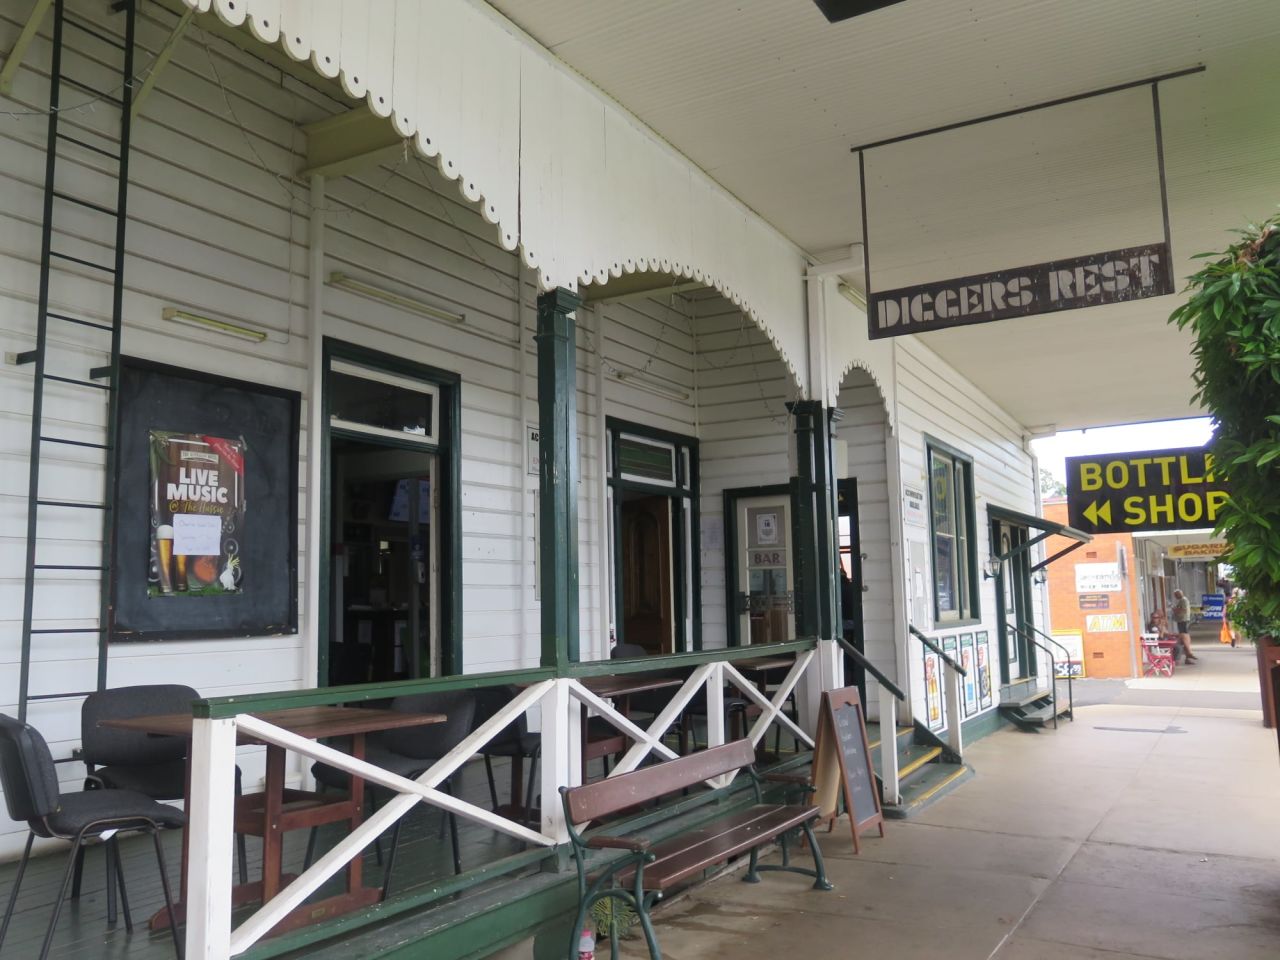 Boonah Tag Along Tour February 2021